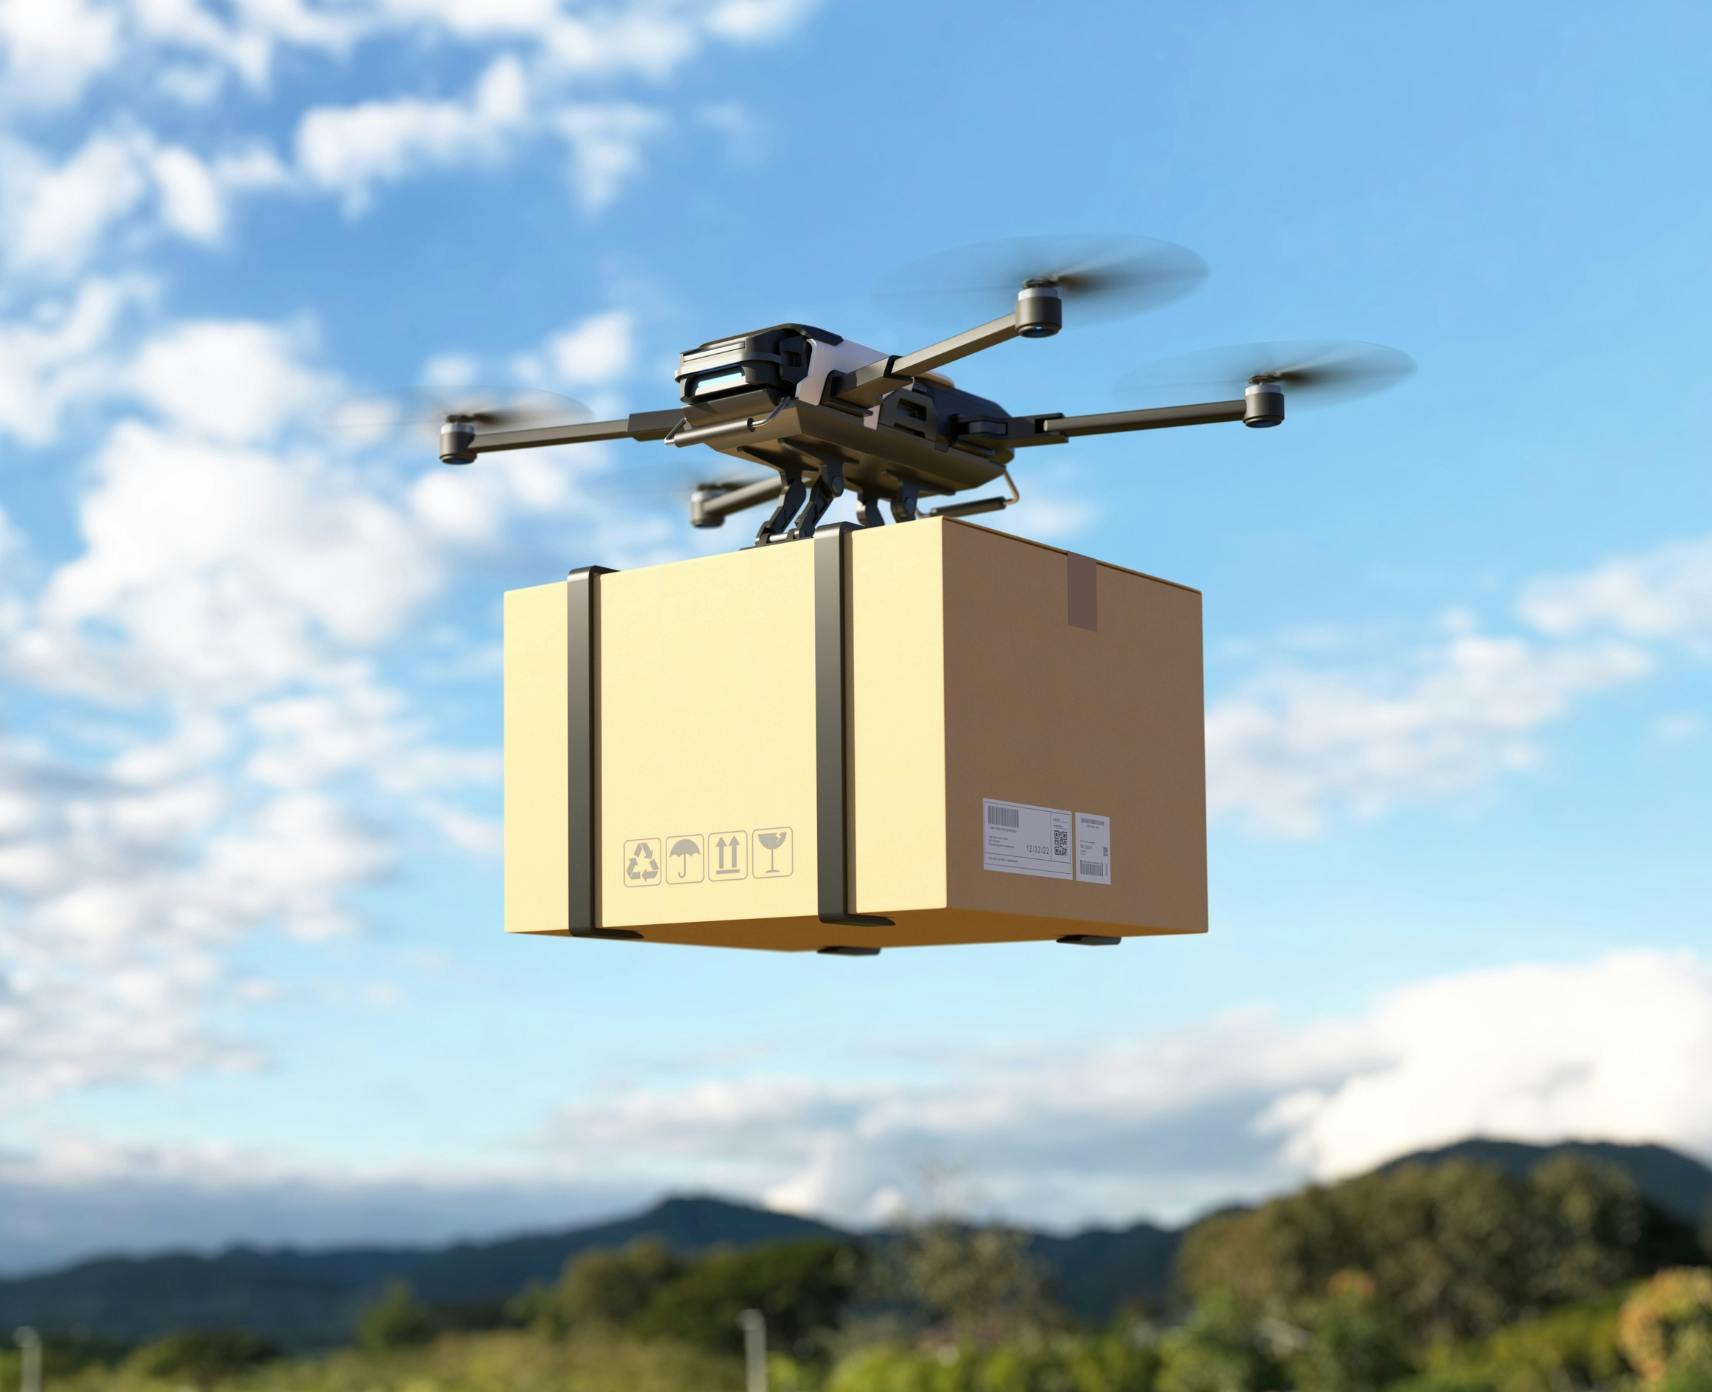 A drone carries a large box in the air.